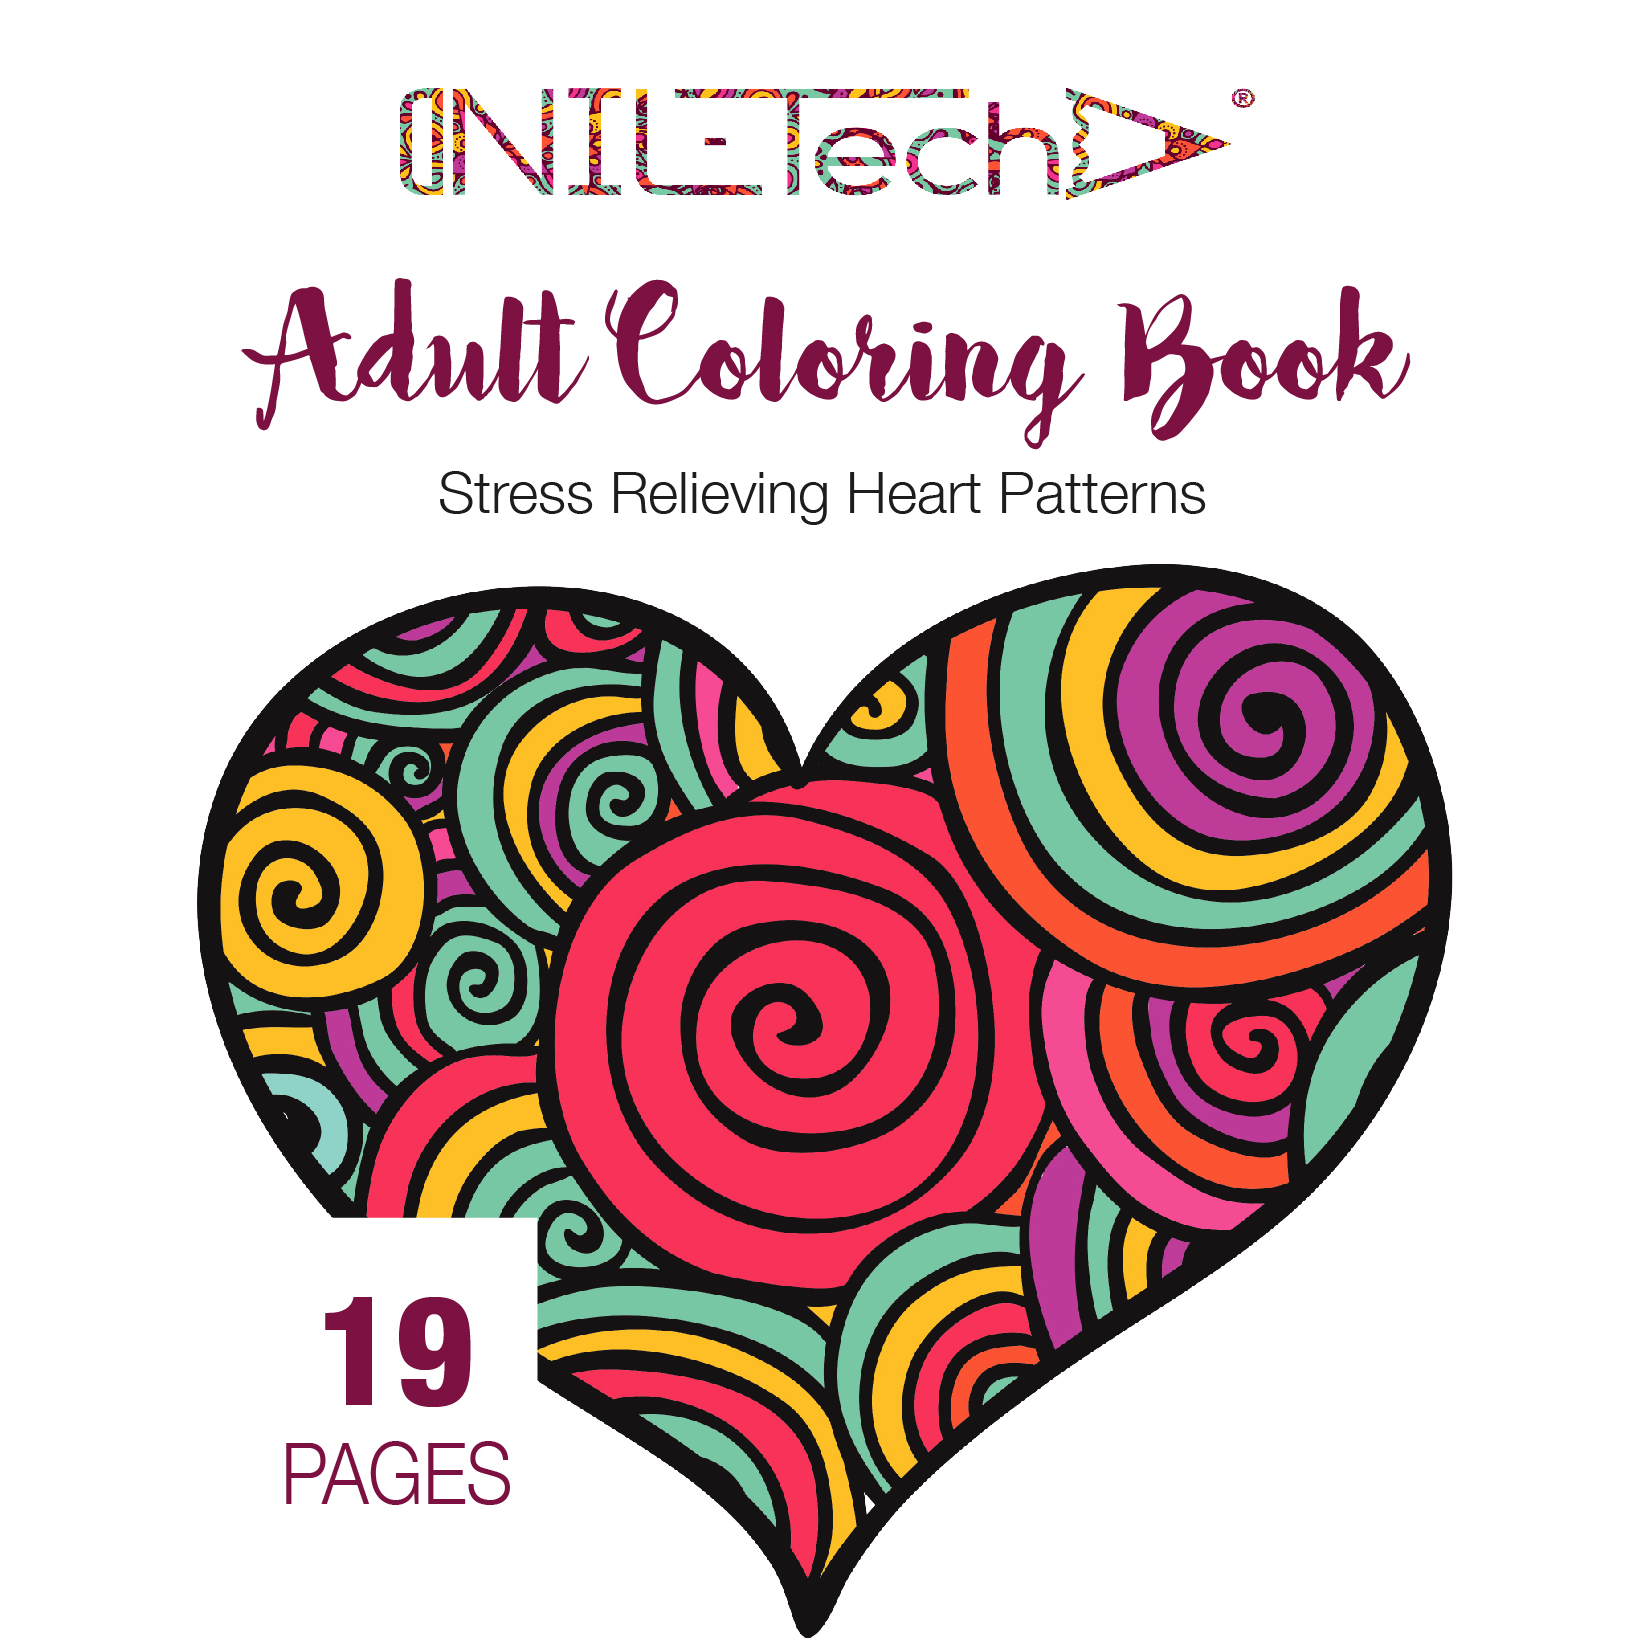 Adult Coloring book with stress relieving Heart patterns